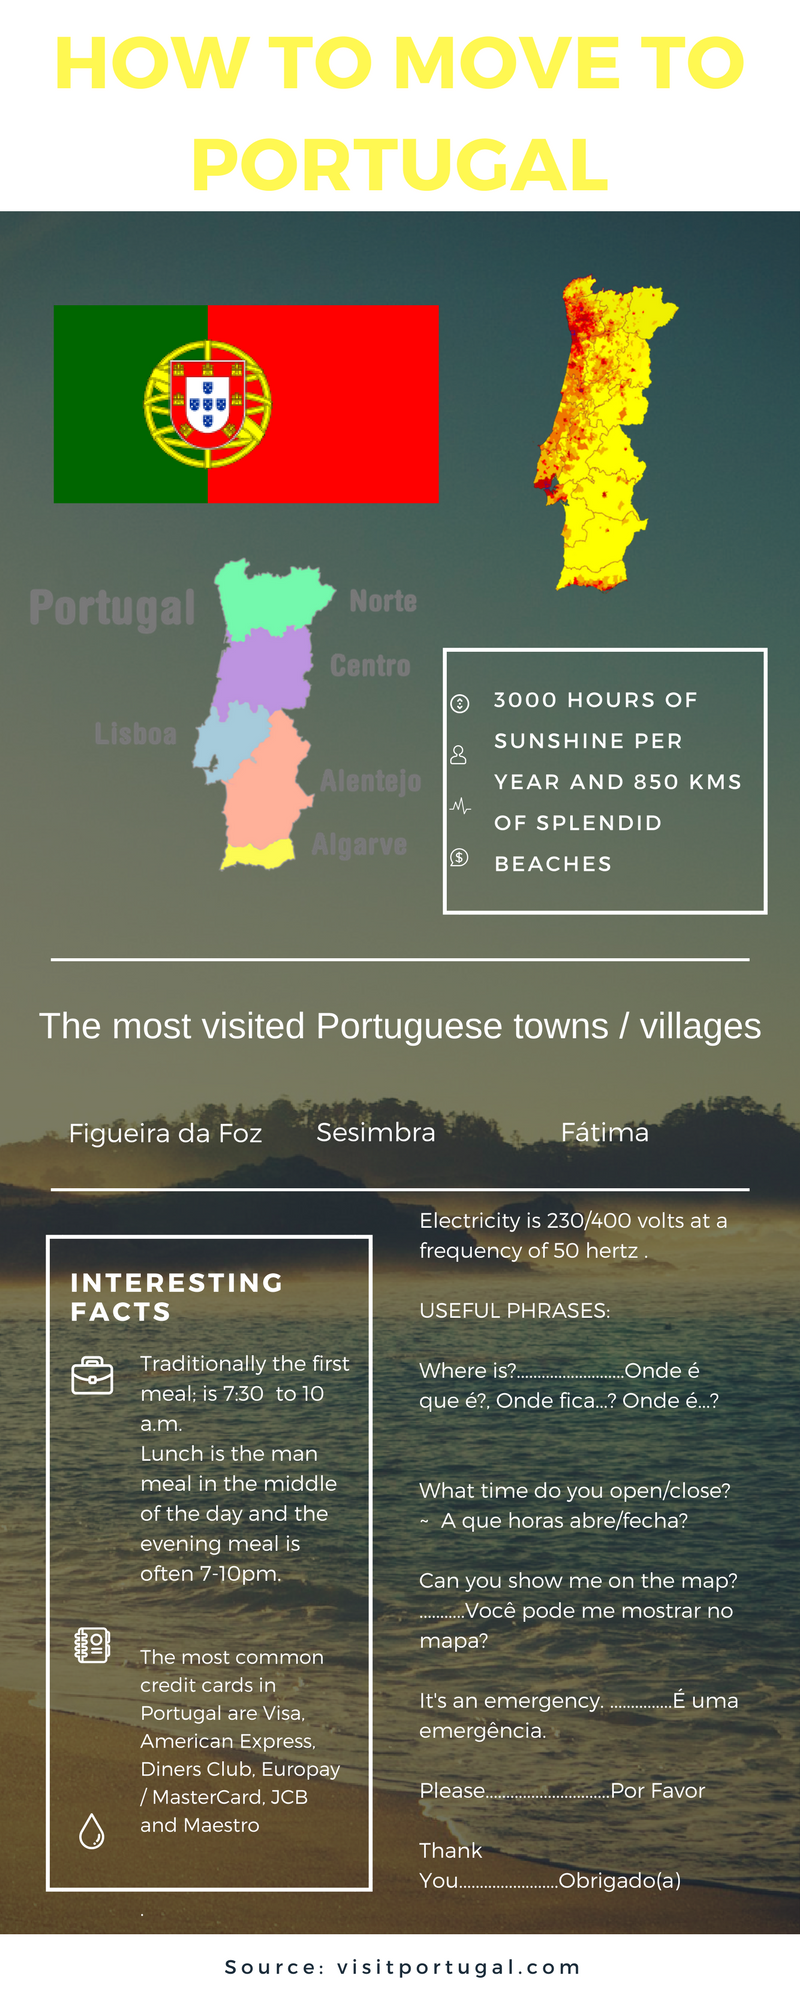 How to Move to Portugal- Your guide to relocating to Portugal Successfully